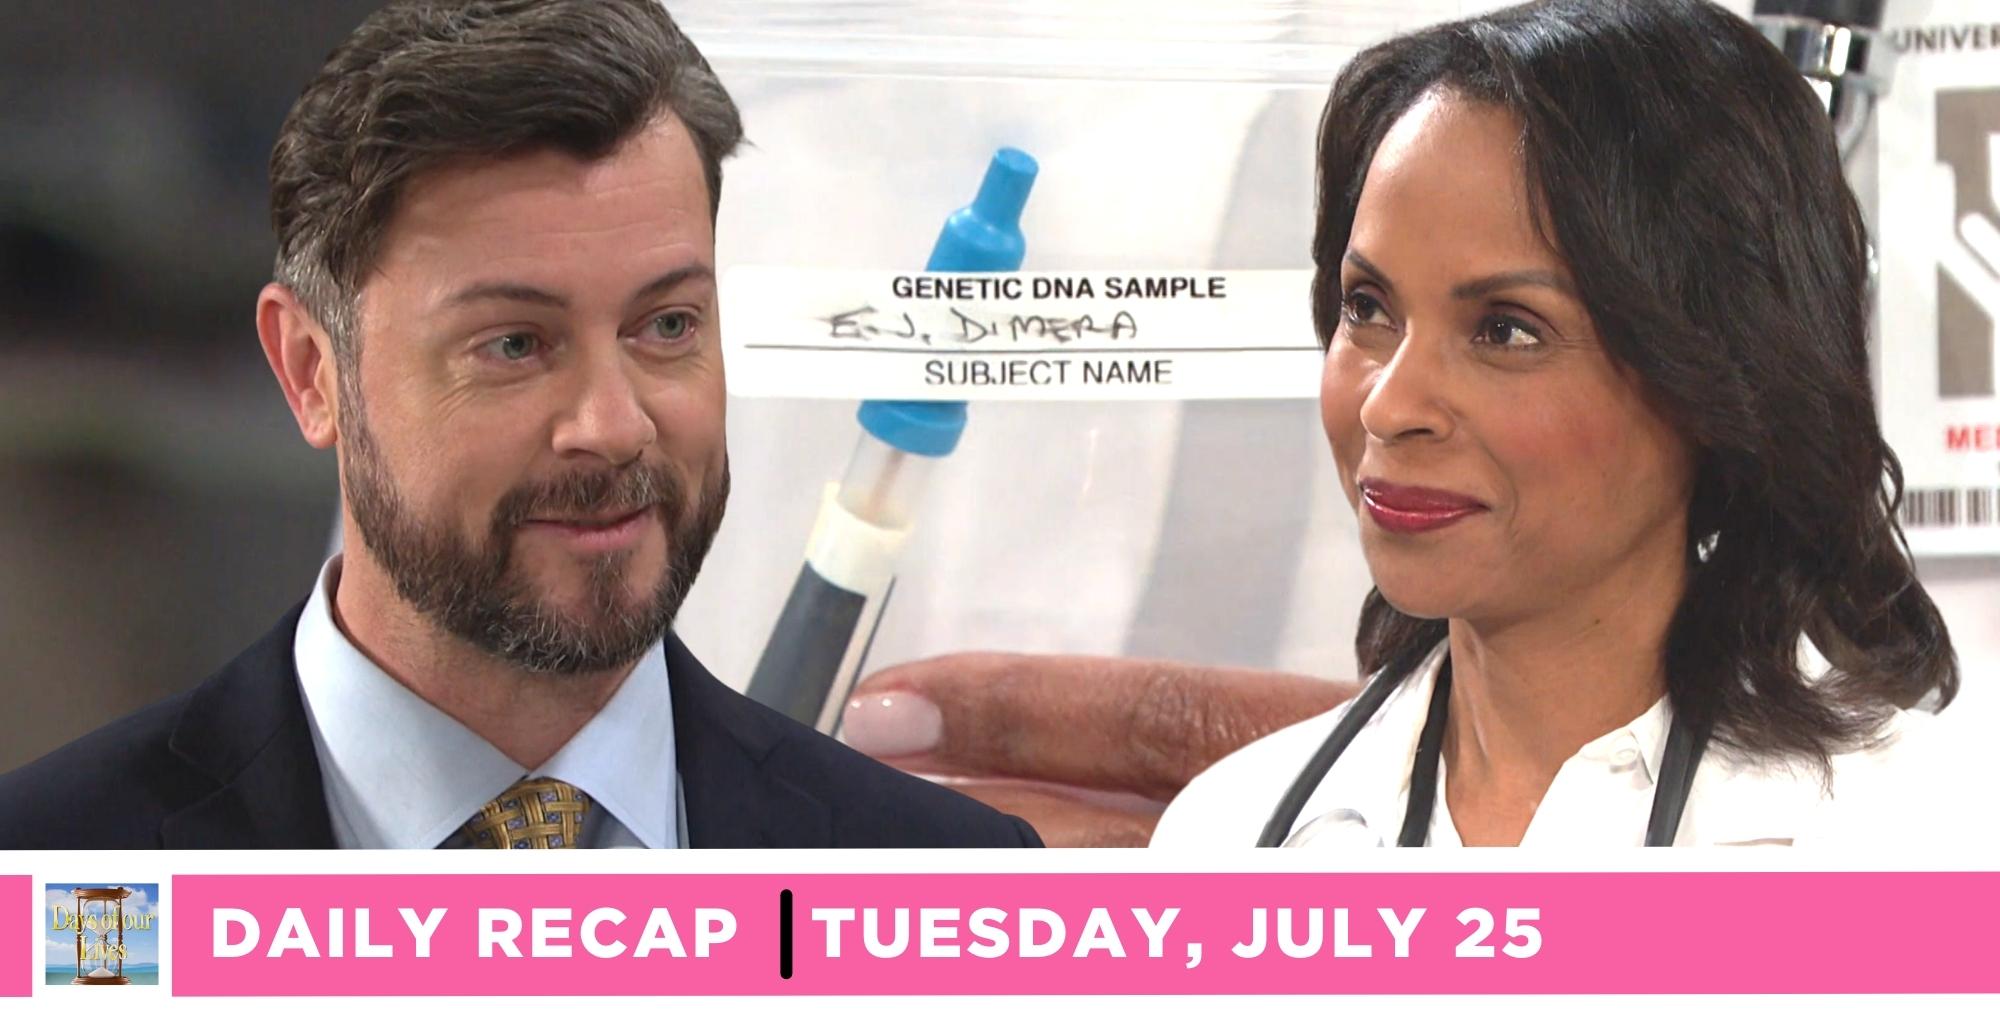 ej dimera gave a dna sample to dr sorenson on the days of our lives recap for july 25, 2023.